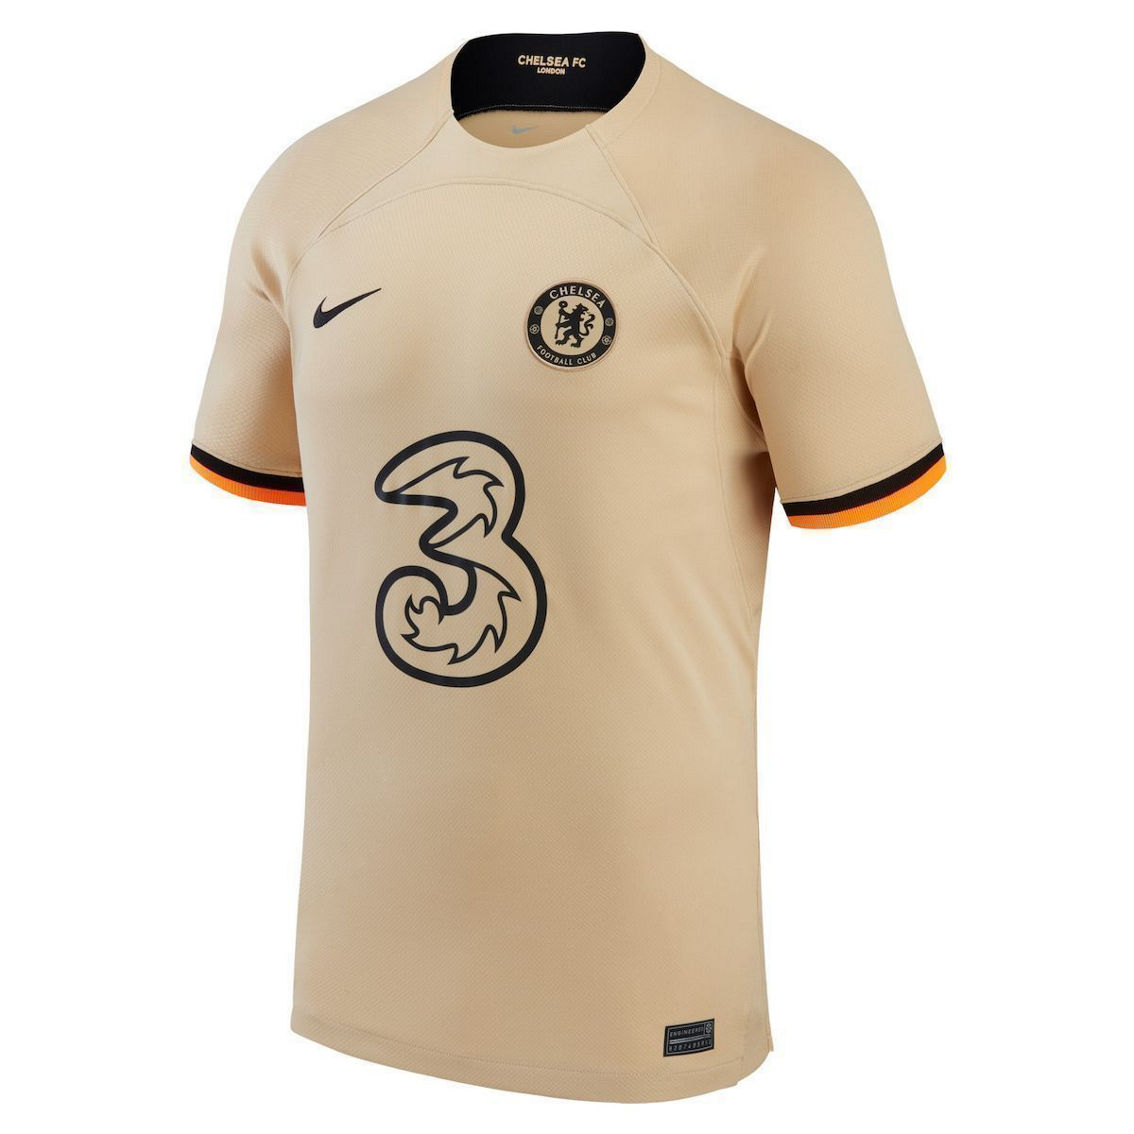 Nike Men's Gold Chelsea 2022/23 Third Replica Jersey - Image 3 of 4